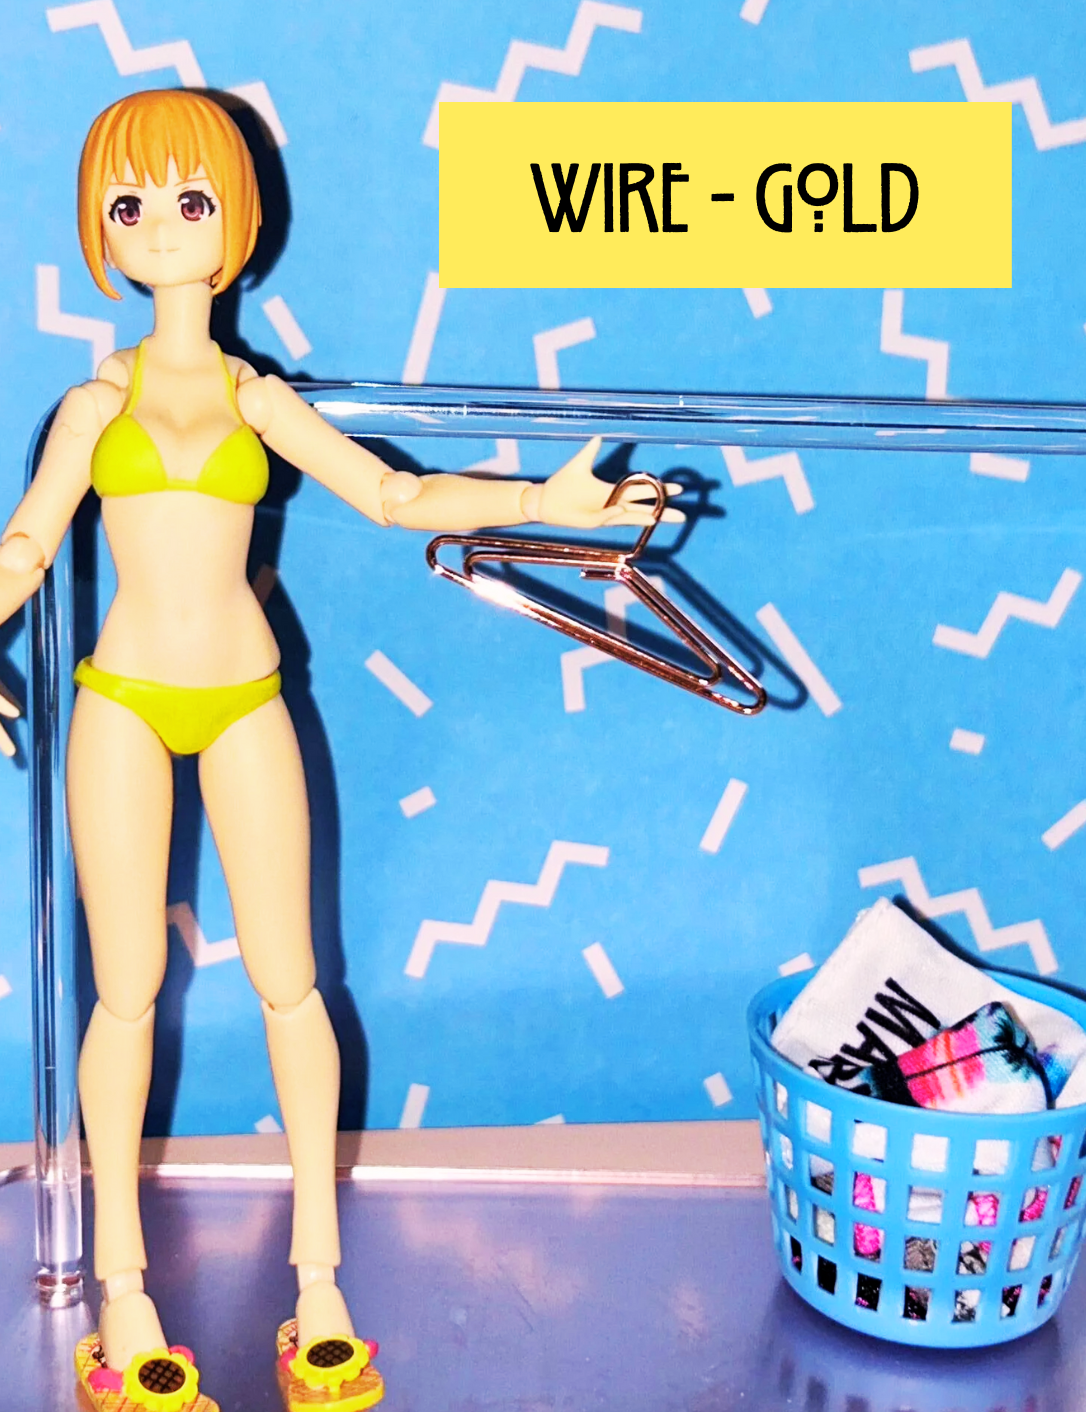 12th Scale Gold Wire Hanger